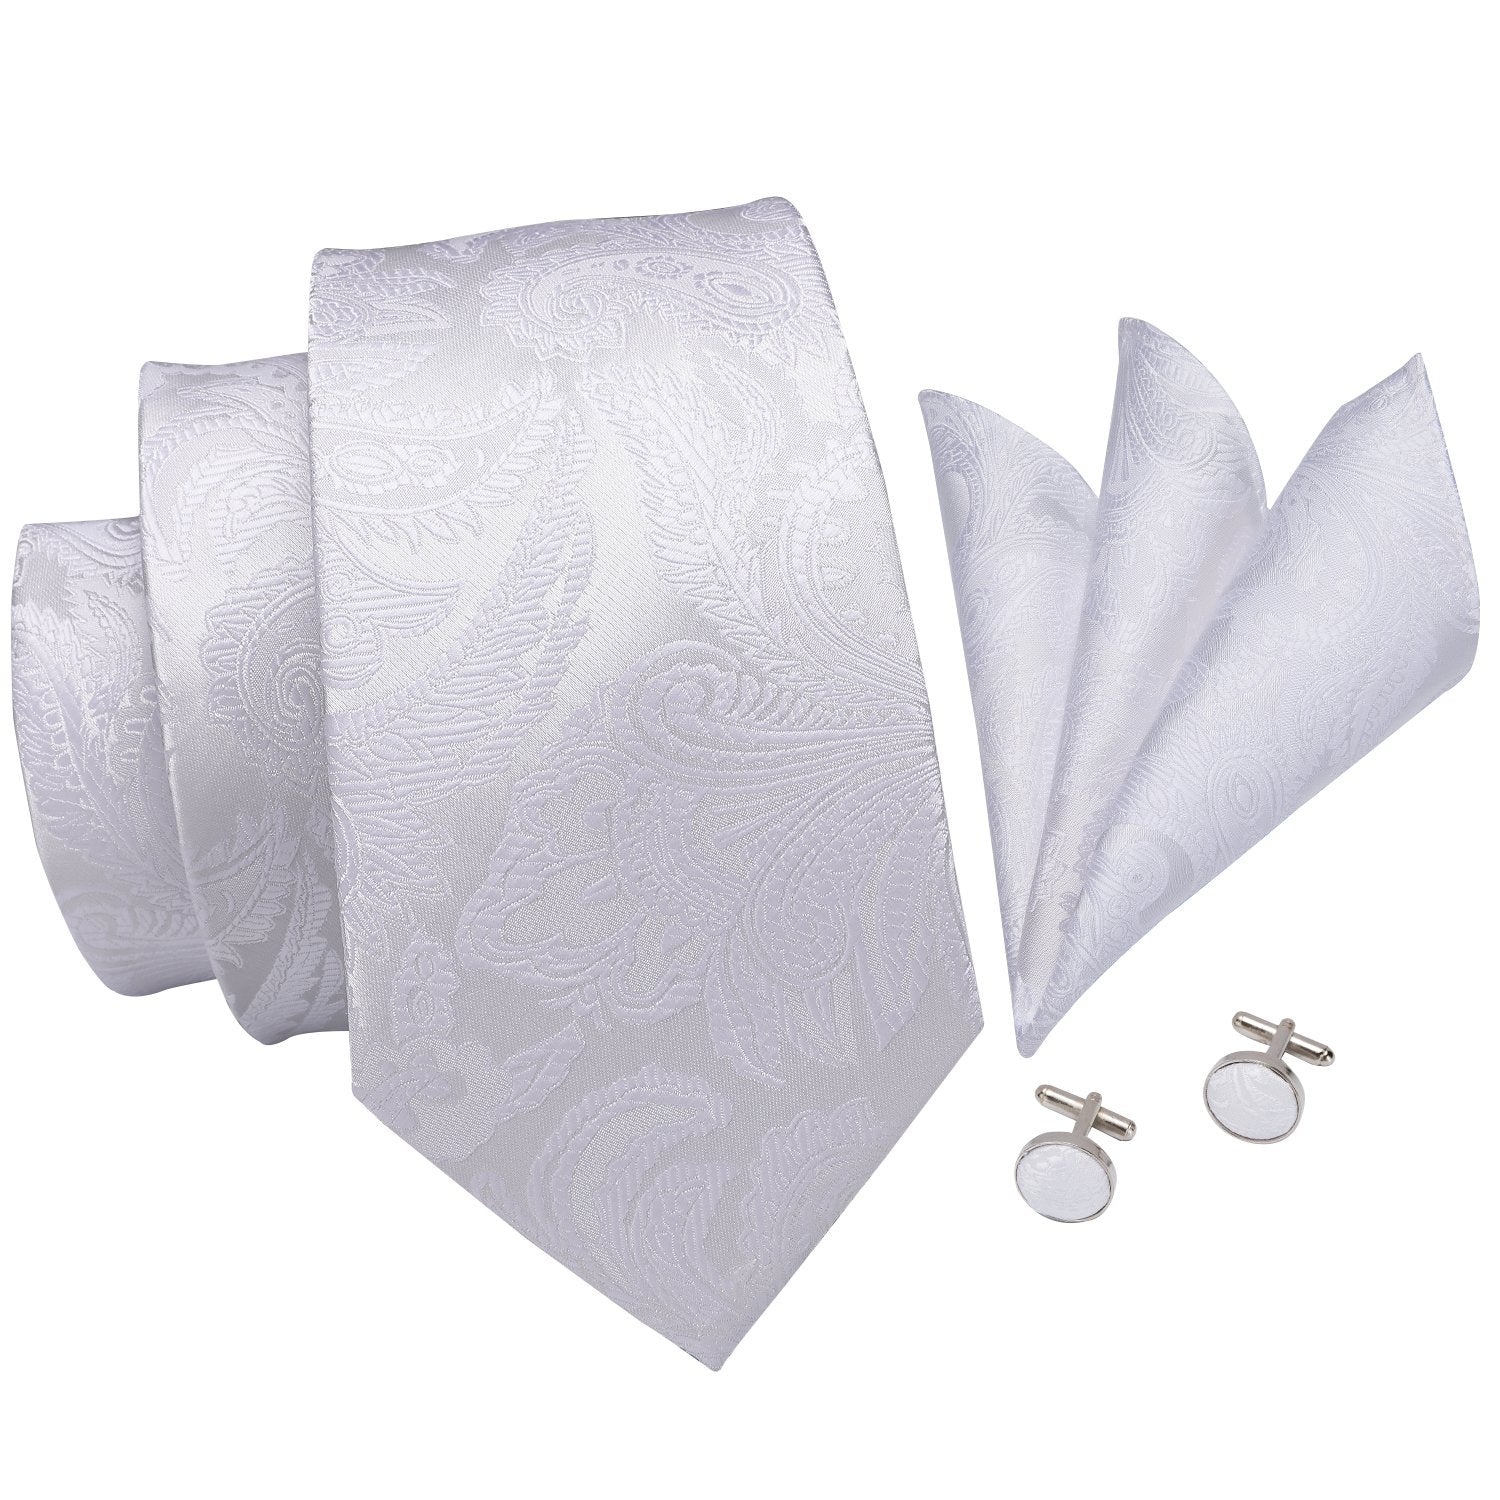 Pure White Paisley Men's Necktie Pocket Square Cufflinks Set with Collar Pin